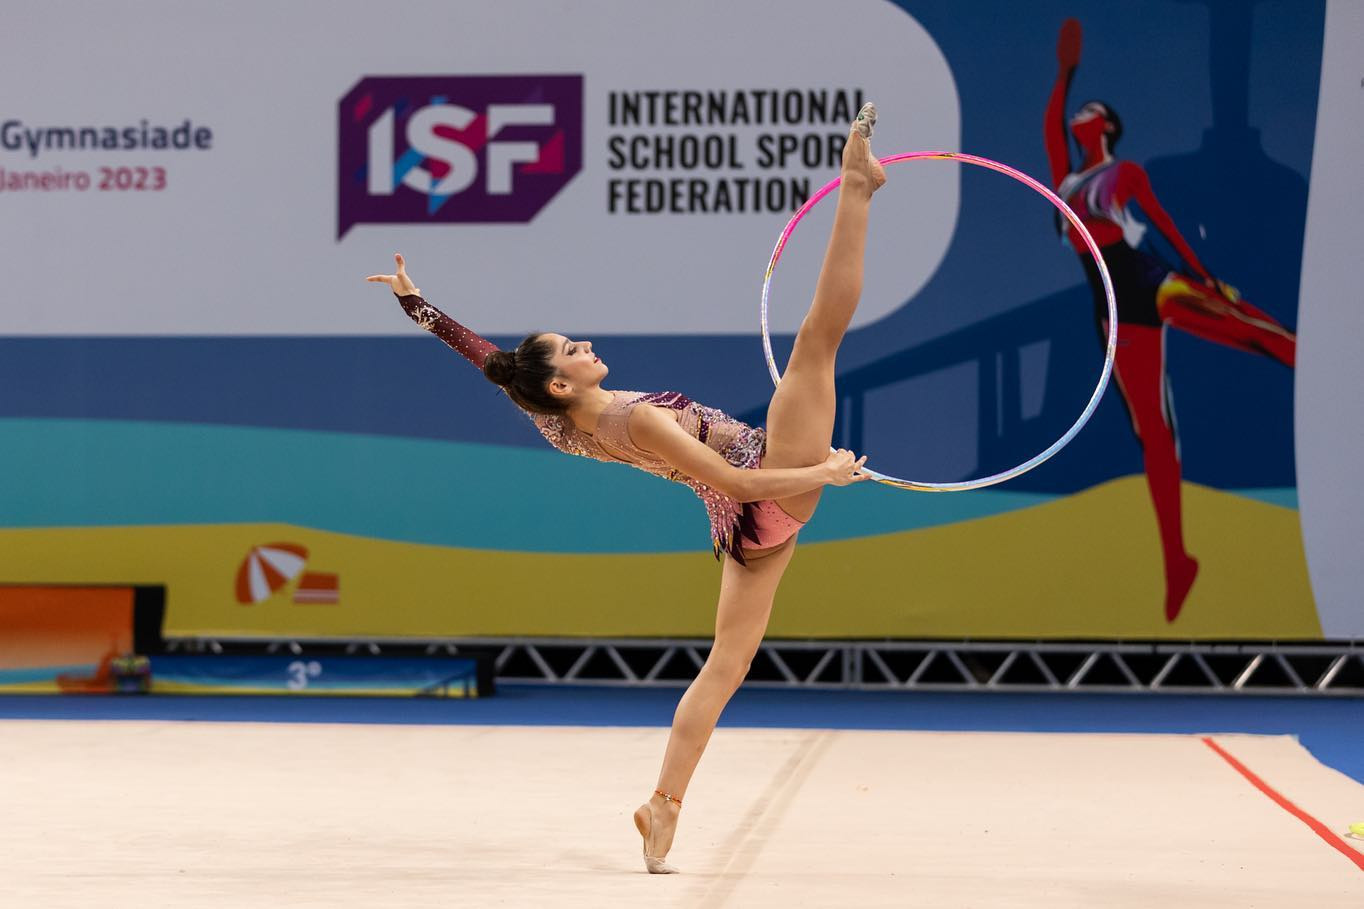 Gymnastics competitions was part of the sports programme today ©ISF